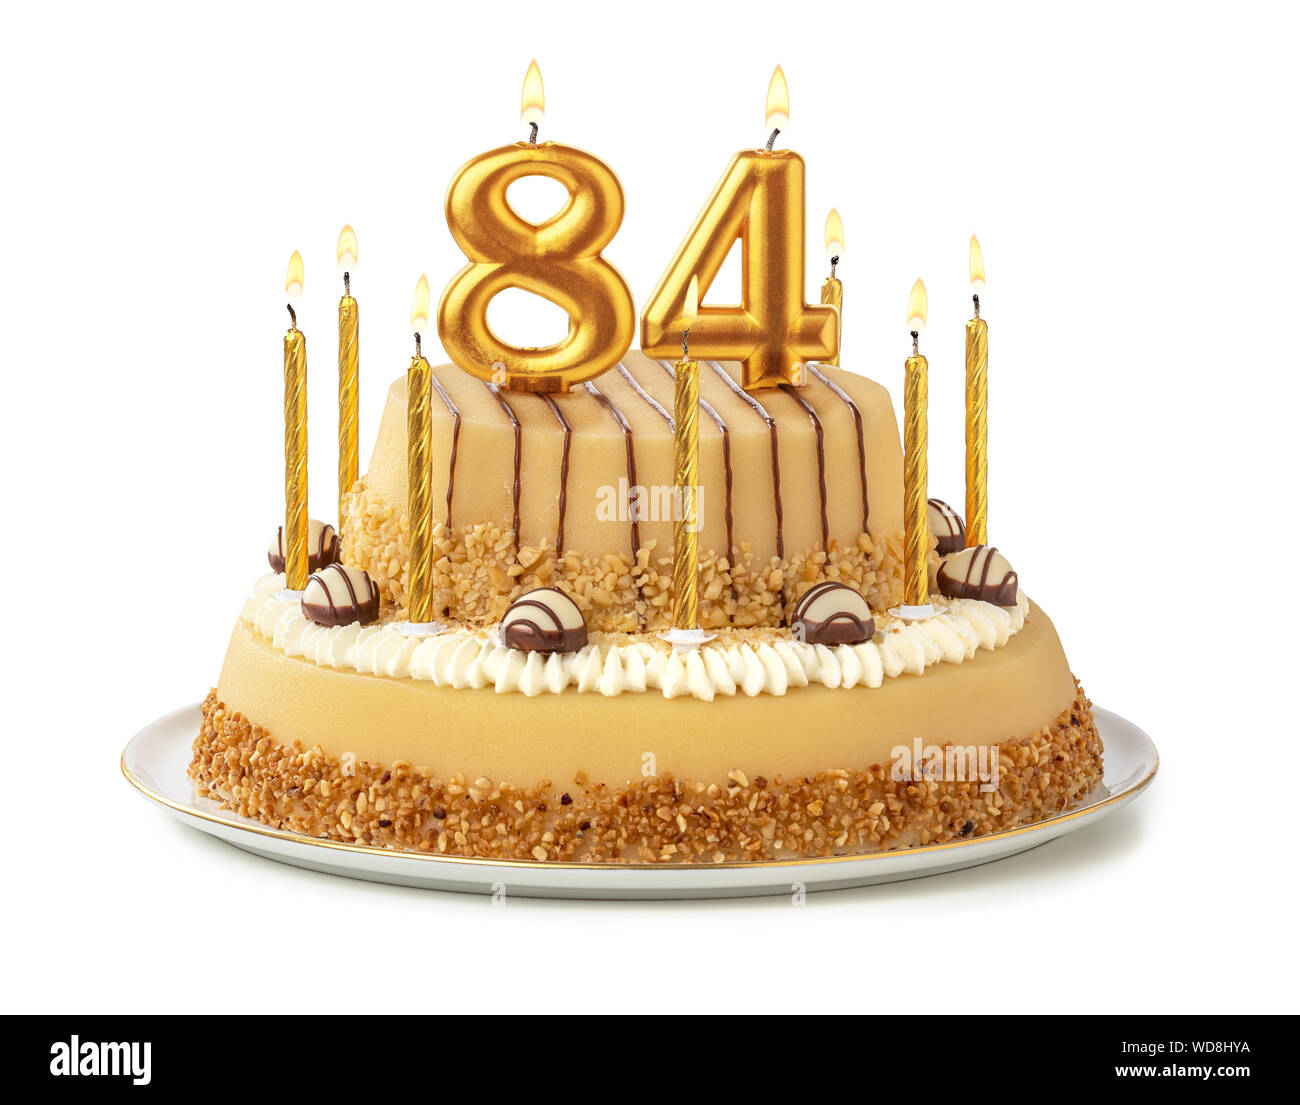 Boum 4 Mai 2022. Festive-cake-with-golden-candles-number-84-WD8HYA